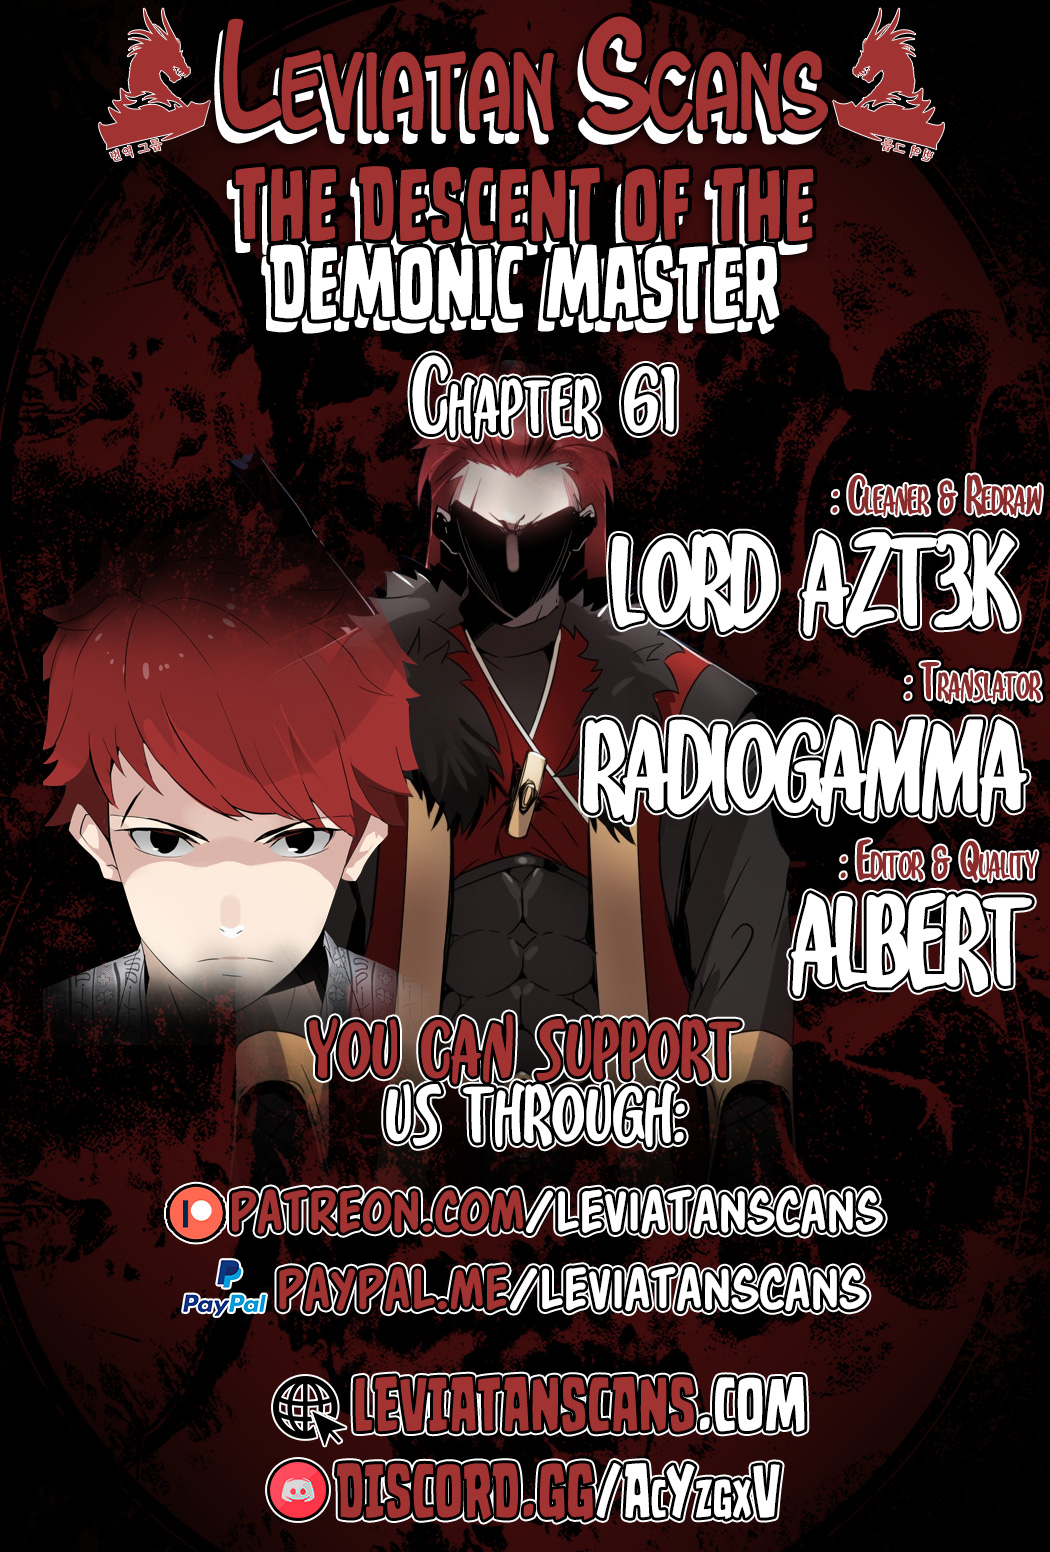 The Descent of the Demonic Master 61 (1)